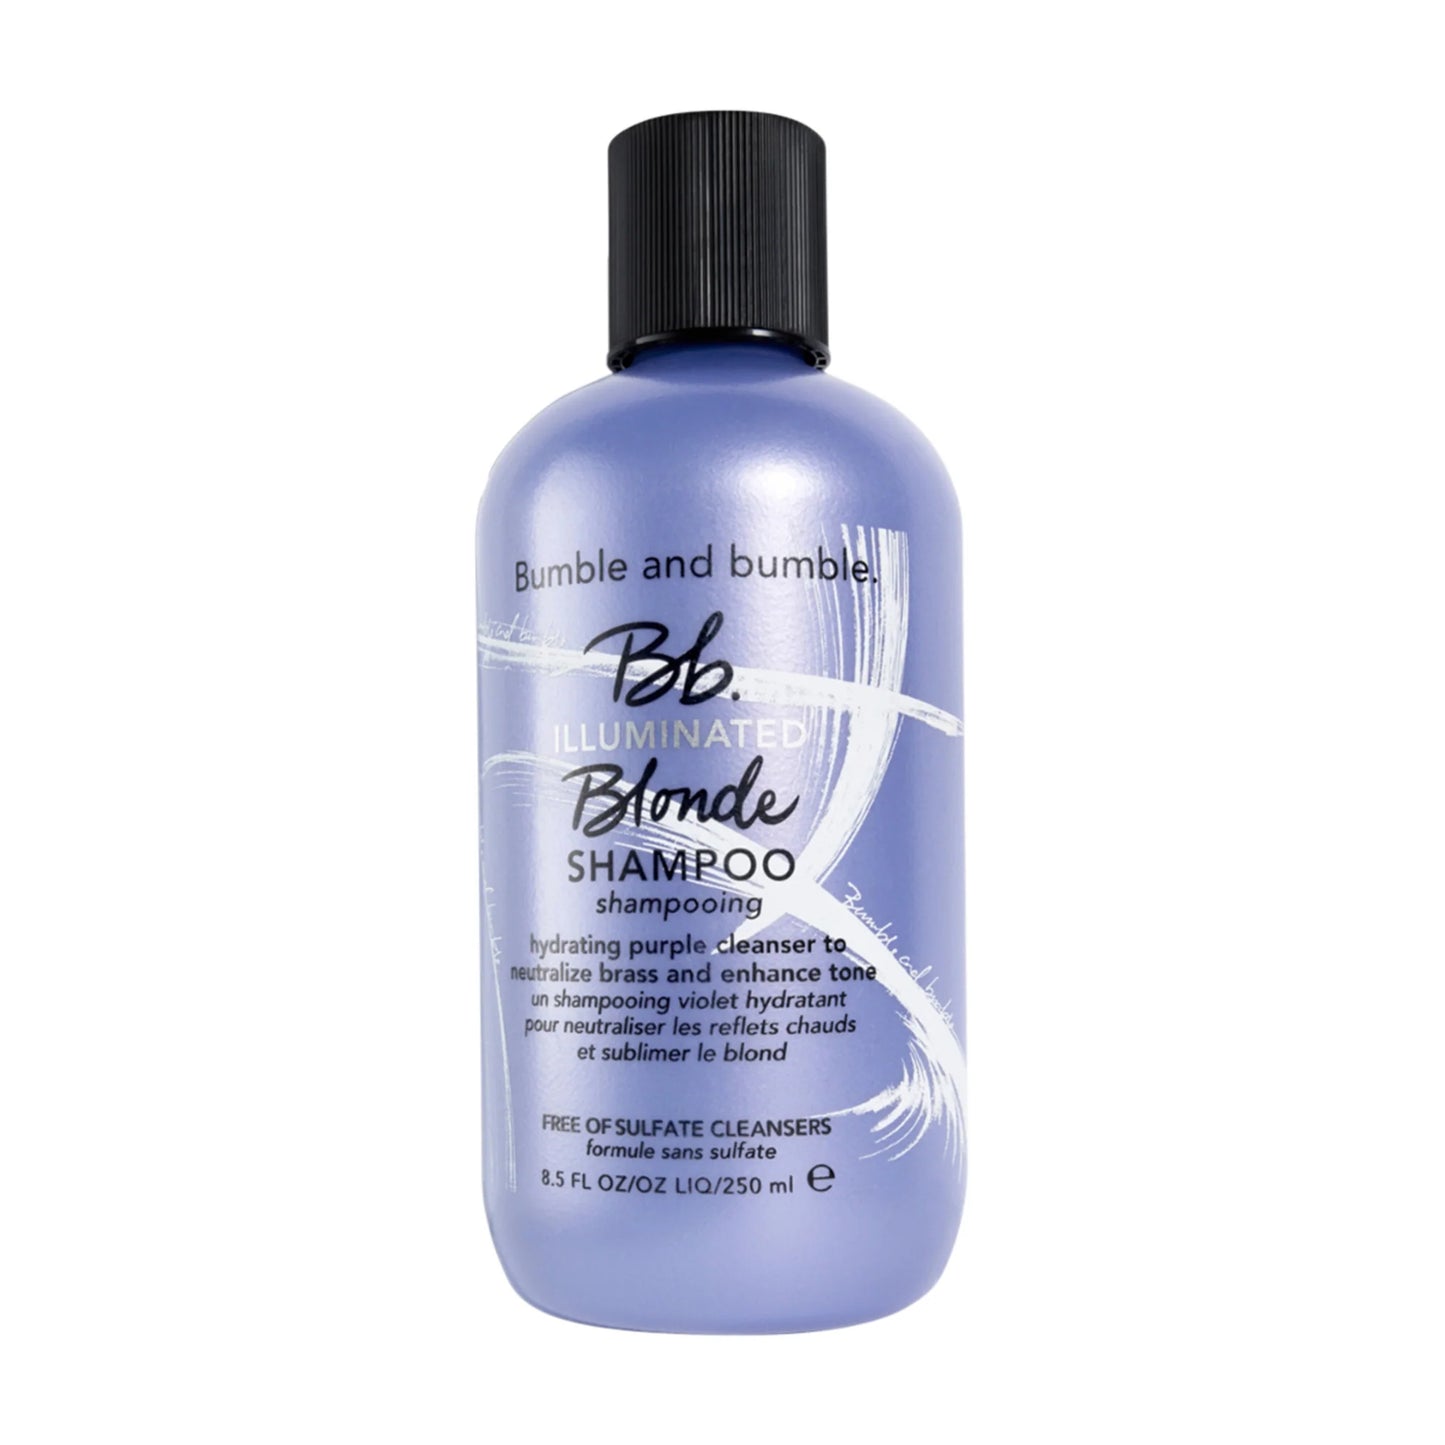 Bumble and bumble Blonde Shampoo